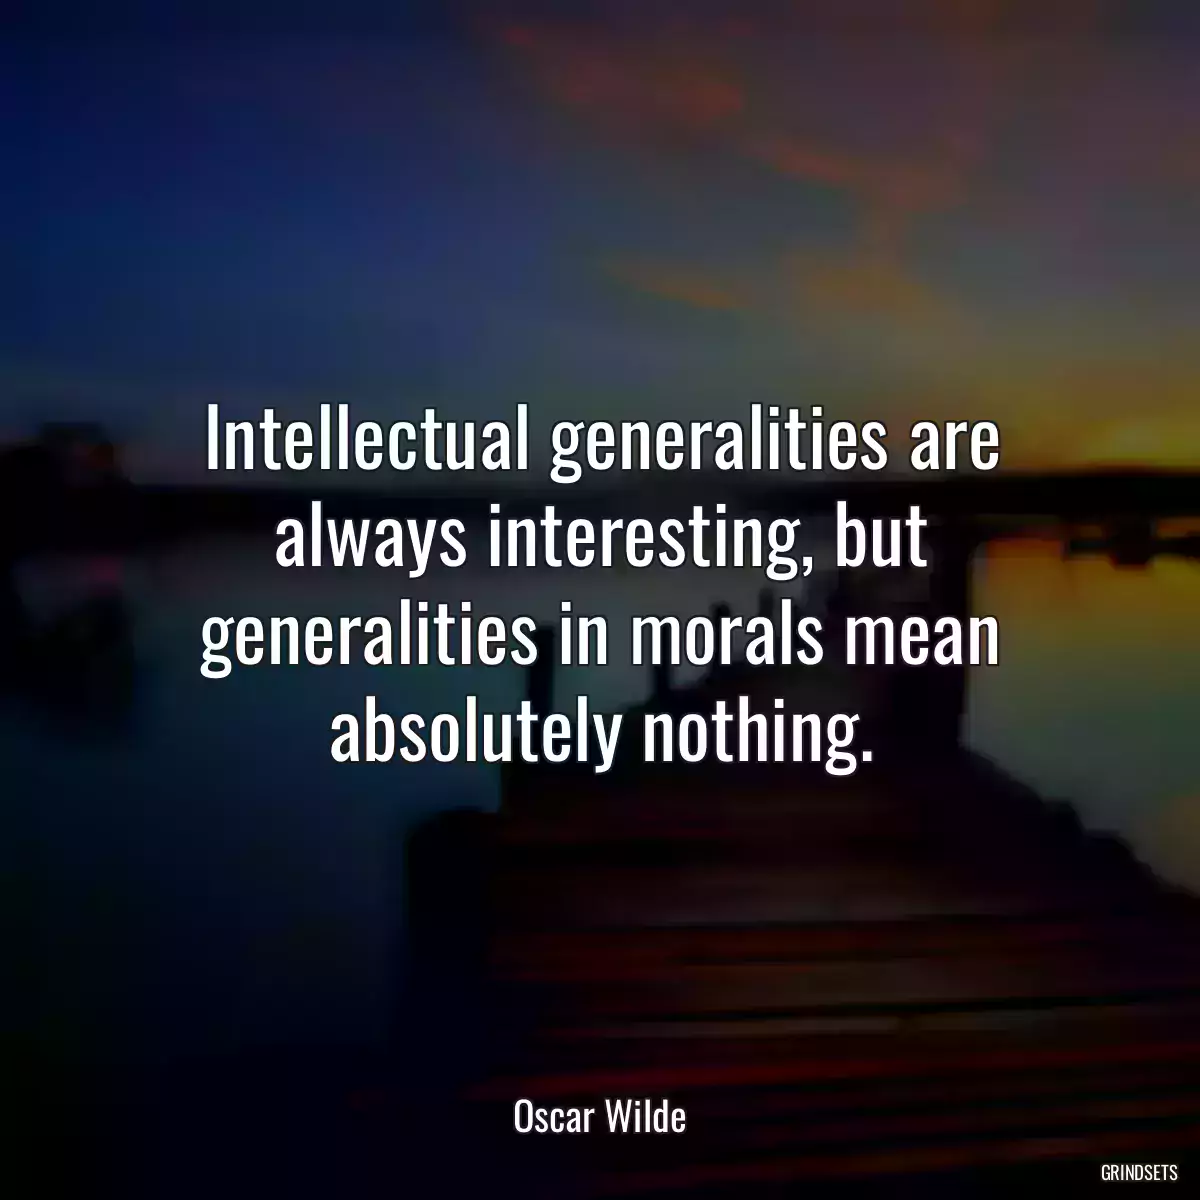 Intellectual generalities are always interesting, but generalities in morals mean absolutely nothing.